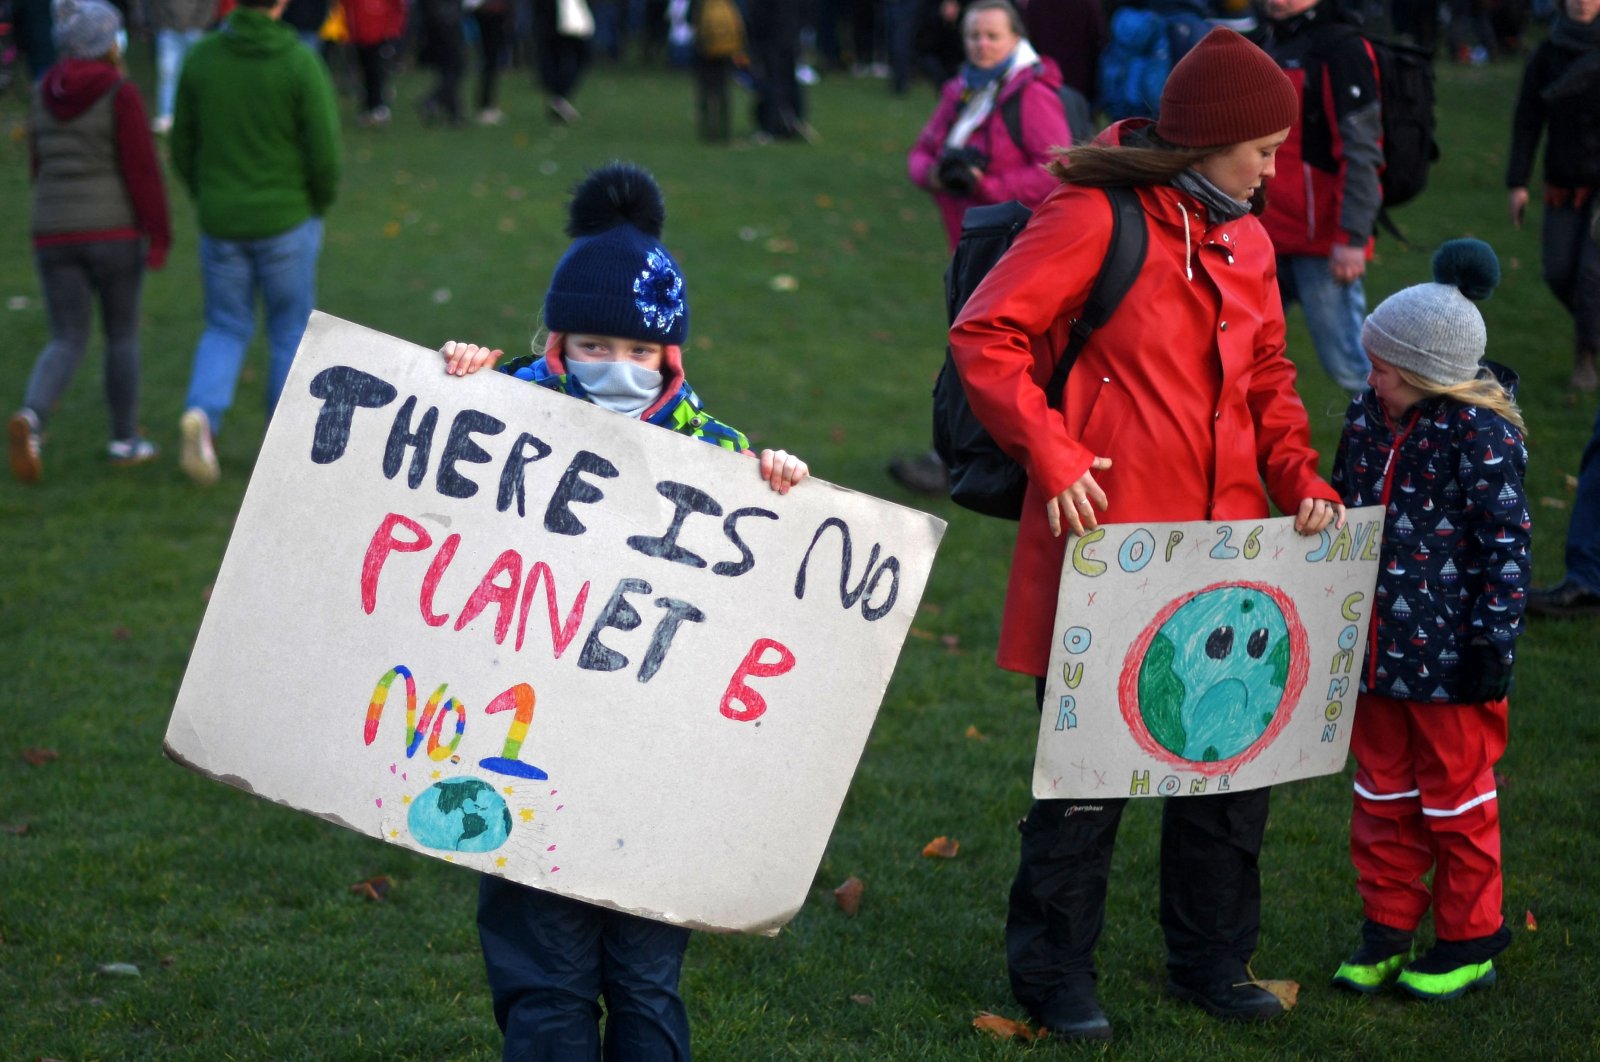 A young protester holds up a placard at a protest rally during a global day of action on climate change during the COP26 U.N. Climate Change Conference in Glasgow, United Kingdom, Nov. 6, 2021. (AFP Photo)